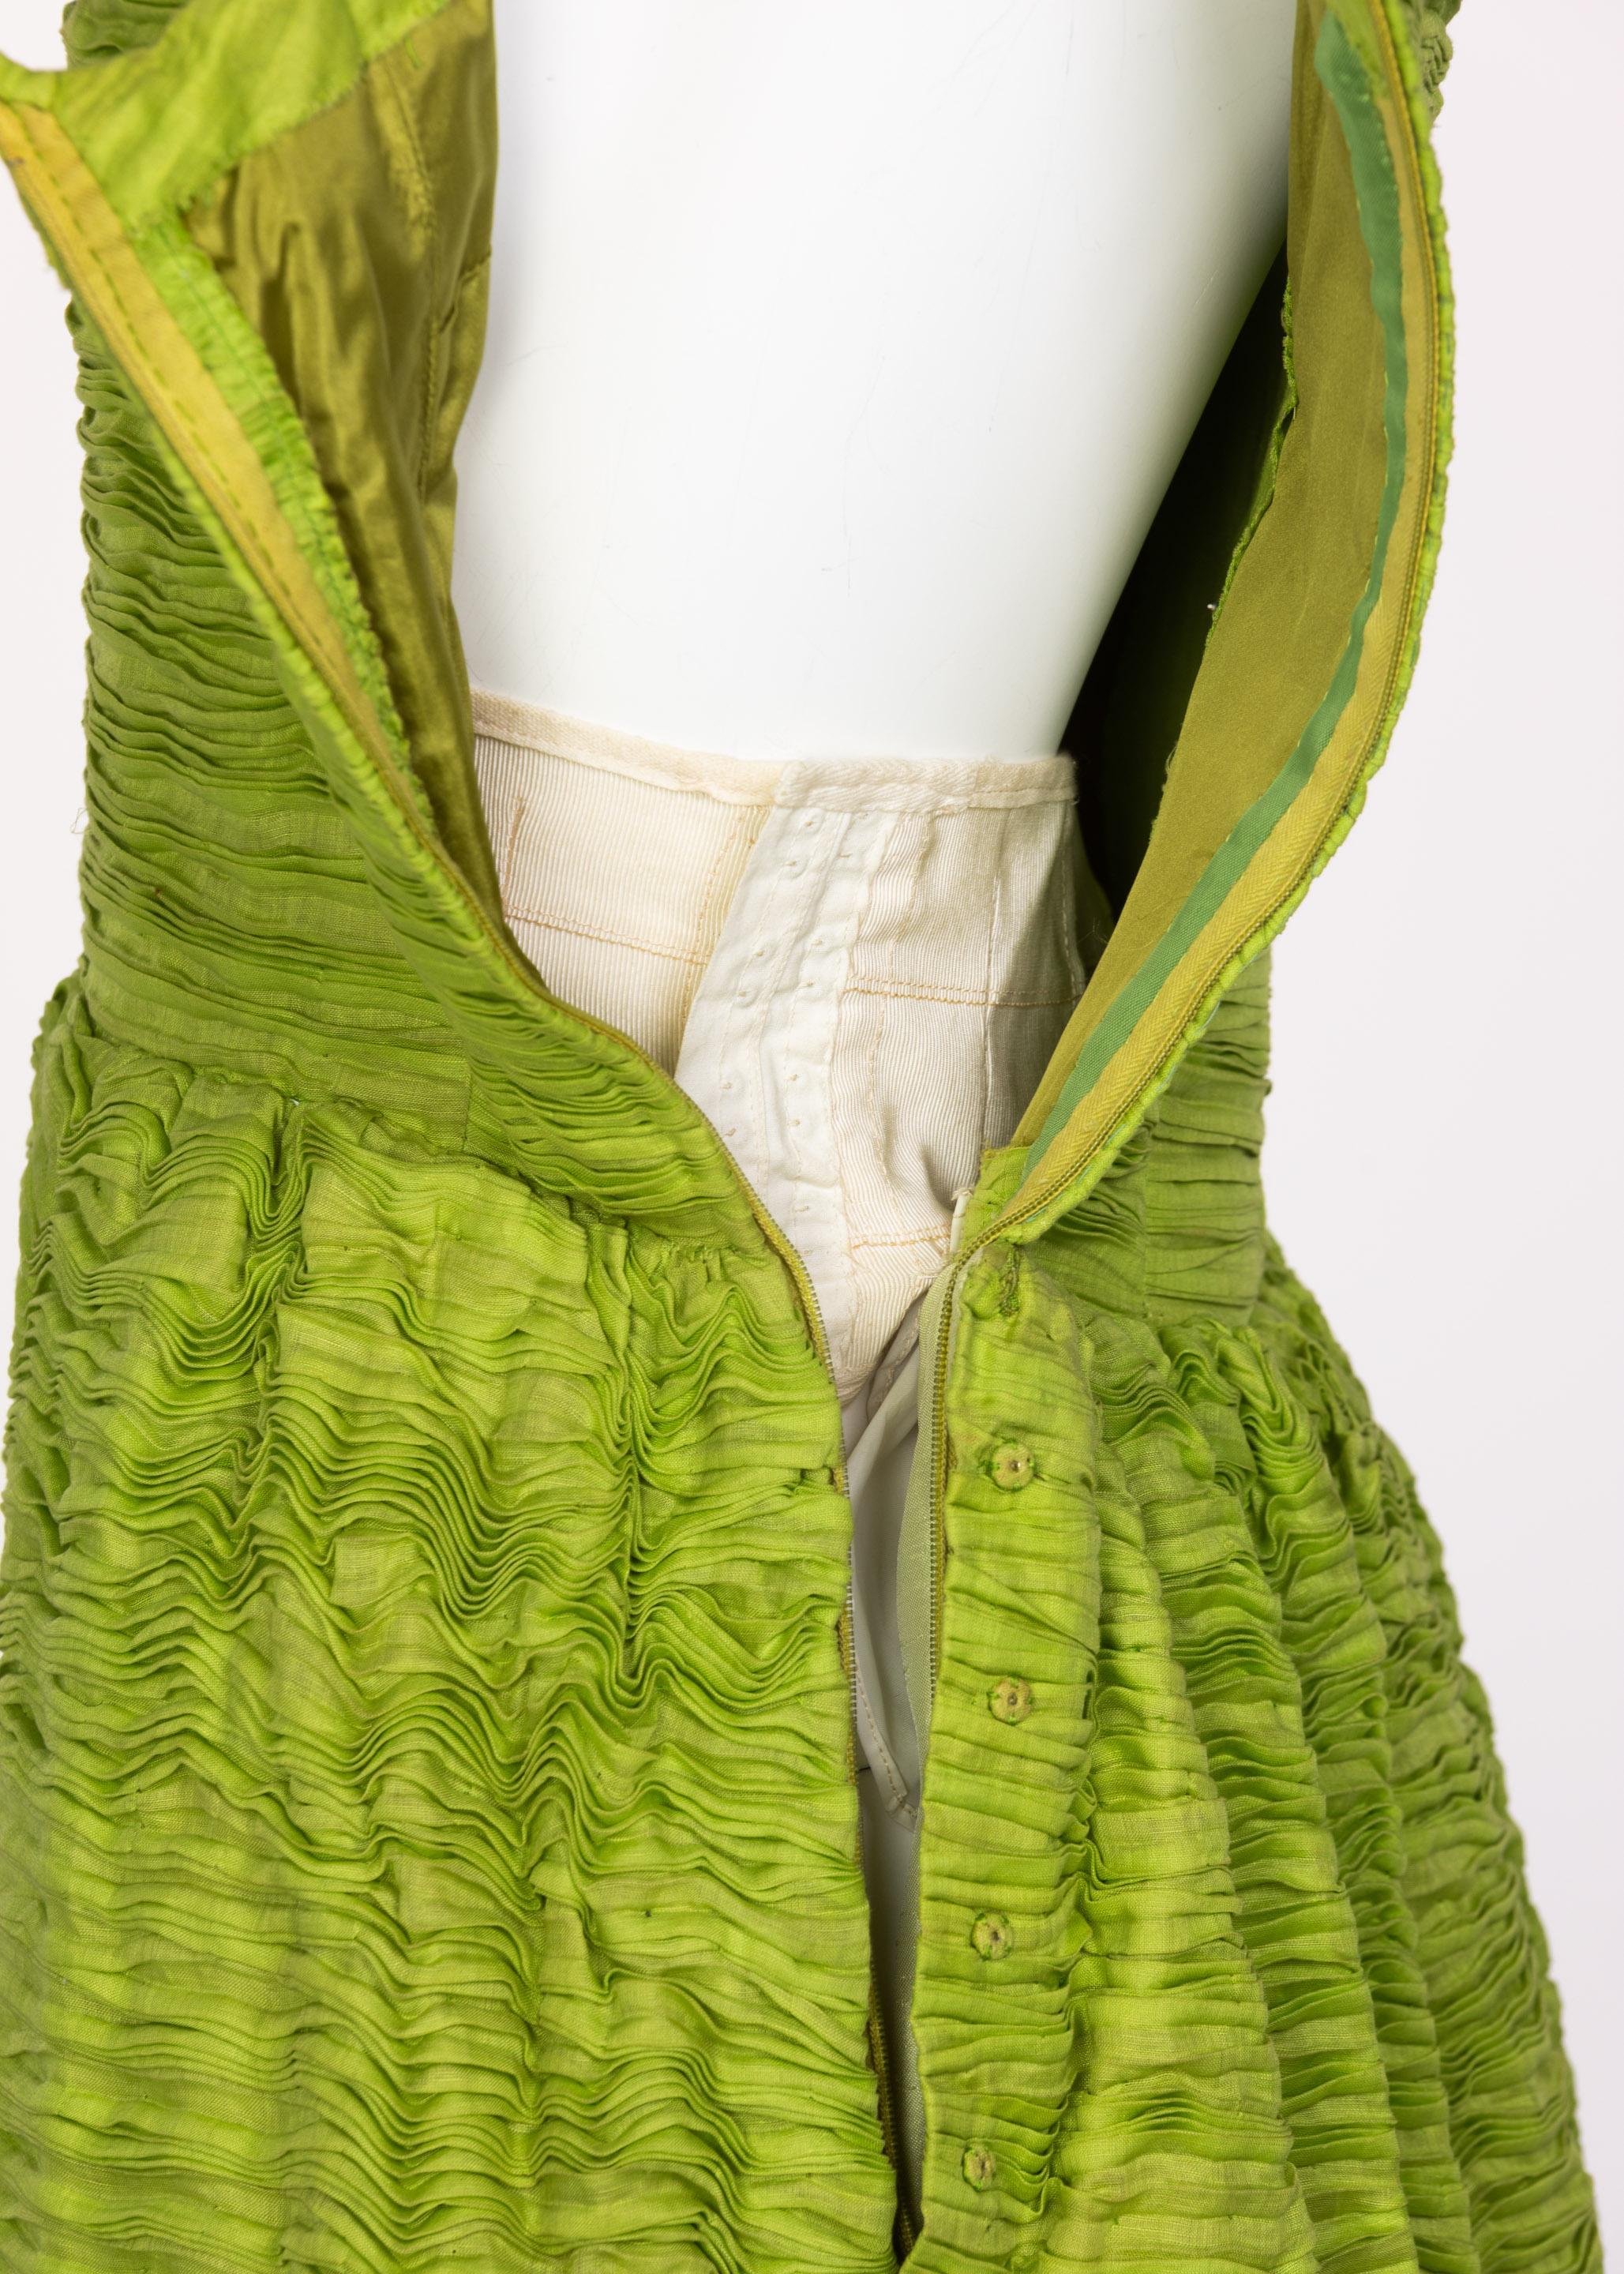 Sybil Connolly Couture Green Pleated Linen Dress, 1960s For Sale 2